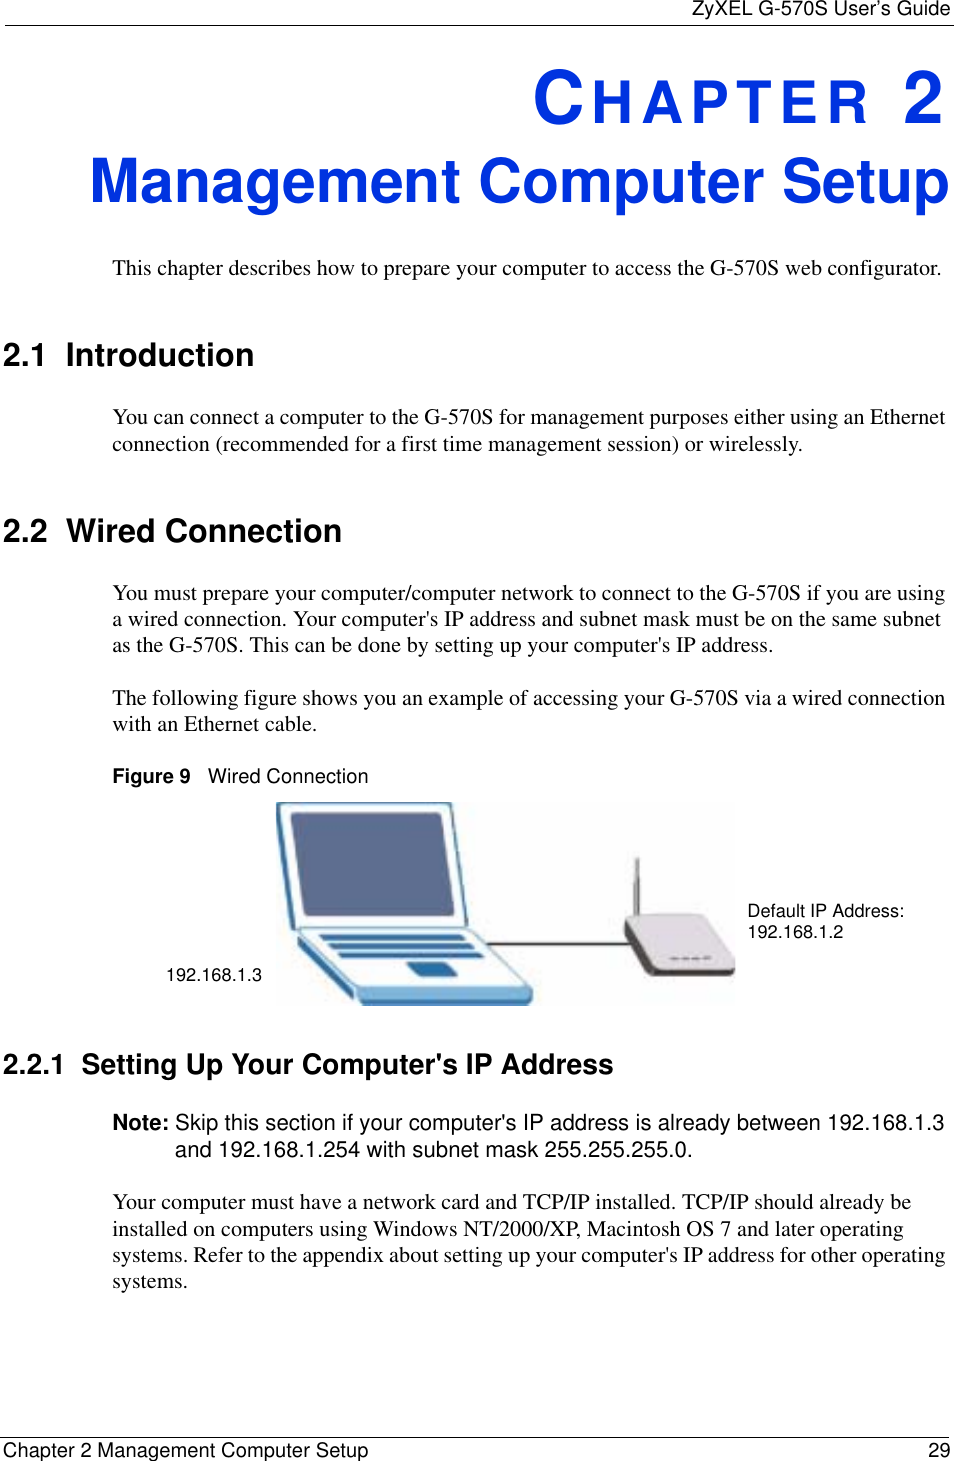 ZyXEL G-570S User’s GuideChapter 2 Management Computer Setup 29CHAPTER 2Management Computer SetupThis chapter describes how to prepare your computer to access the G-570S web configurator. 2.1  IntroductionYou can connect a computer to the G-570S for management purposes either using an Ethernet connection (recommended for a first time management session) or wirelessly.2.2  Wired ConnectionYou must prepare your computer/computer network to connect to the G-570S if you are using a wired connection. Your computer&apos;s IP address and subnet mask must be on the same subnet as the G-570S. This can be done by setting up your computer&apos;s IP address. The following figure shows you an example of accessing your G-570S via a wired connection with an Ethernet cable.Figure 9   Wired Connection2.2.1  Setting Up Your Computer&apos;s IP AddressNote: Skip this section if your computer&apos;s IP address is already between 192.168.1.3 and 192.168.1.254 with subnet mask 255.255.255.0. Your computer must have a network card and TCP/IP installed. TCP/IP should already be installed on computers using Windows NT/2000/XP, Macintosh OS 7 and later operating systems. Refer to the appendix about setting up your computer&apos;s IP address for other operating systems.192.168.1.3Default IP Address: 192.168.1.2